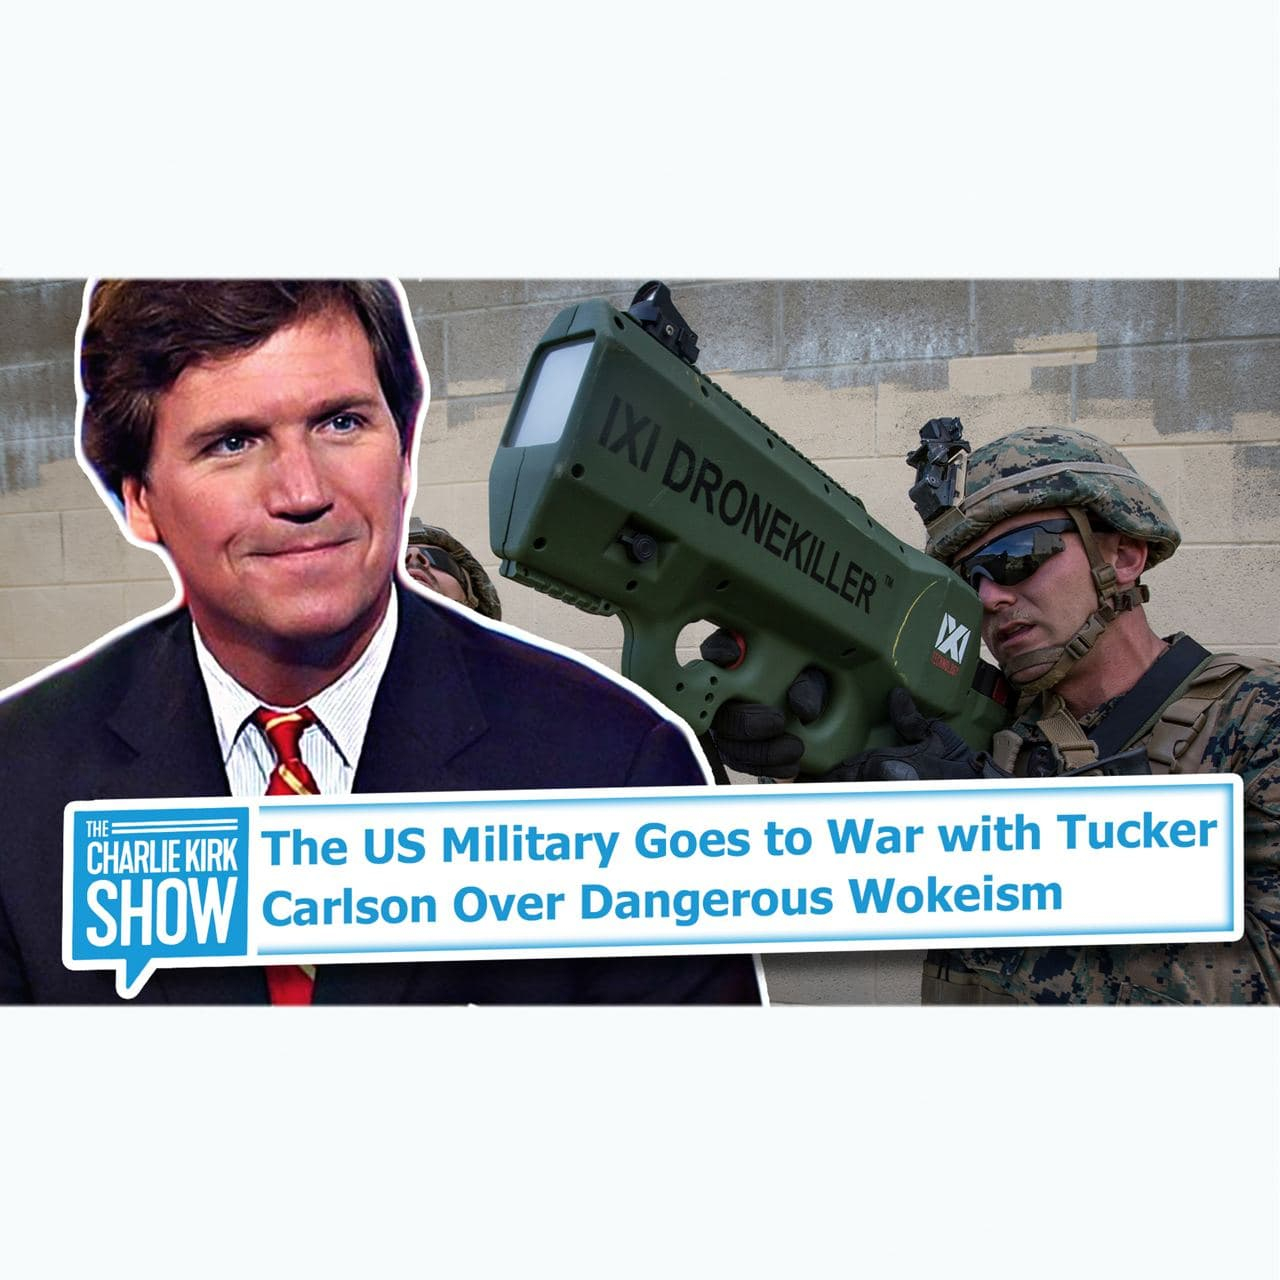 The US Military Goes to War with Tucker Carlson Over Dangerous Wokeism